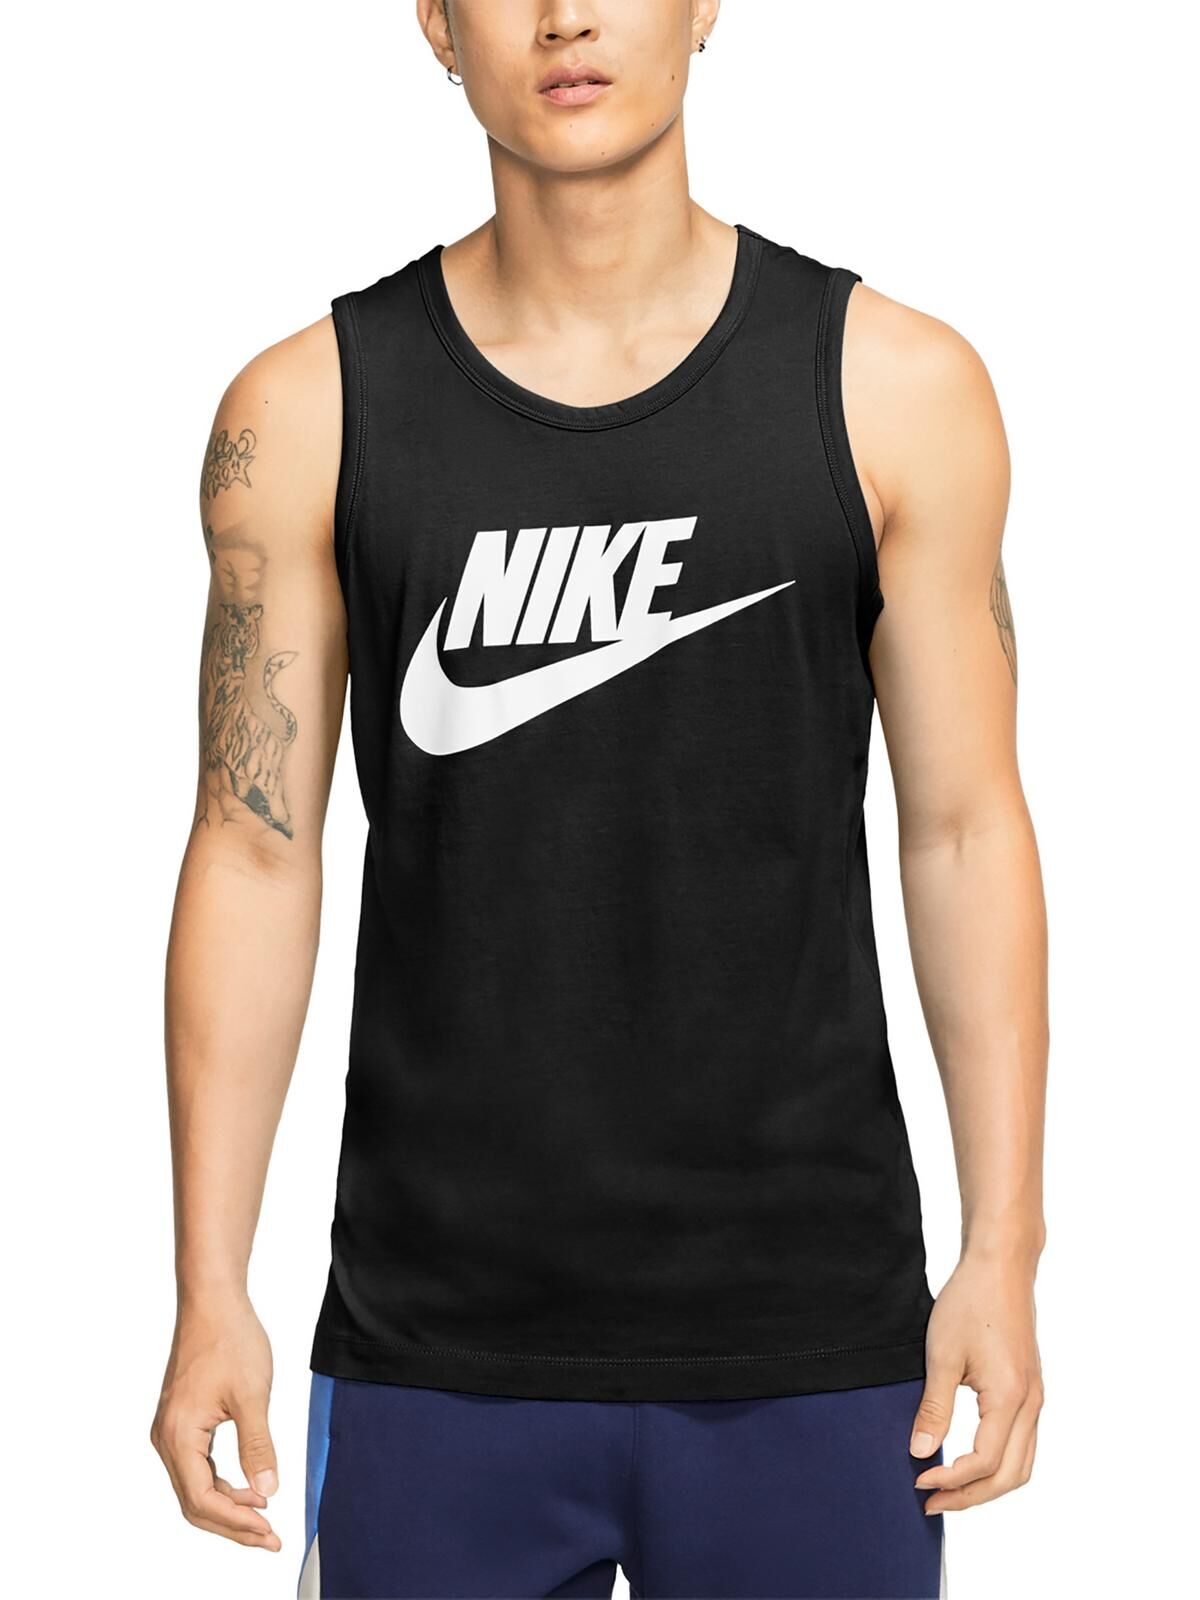 Nike Mens Running Fitness Tank Top Small male